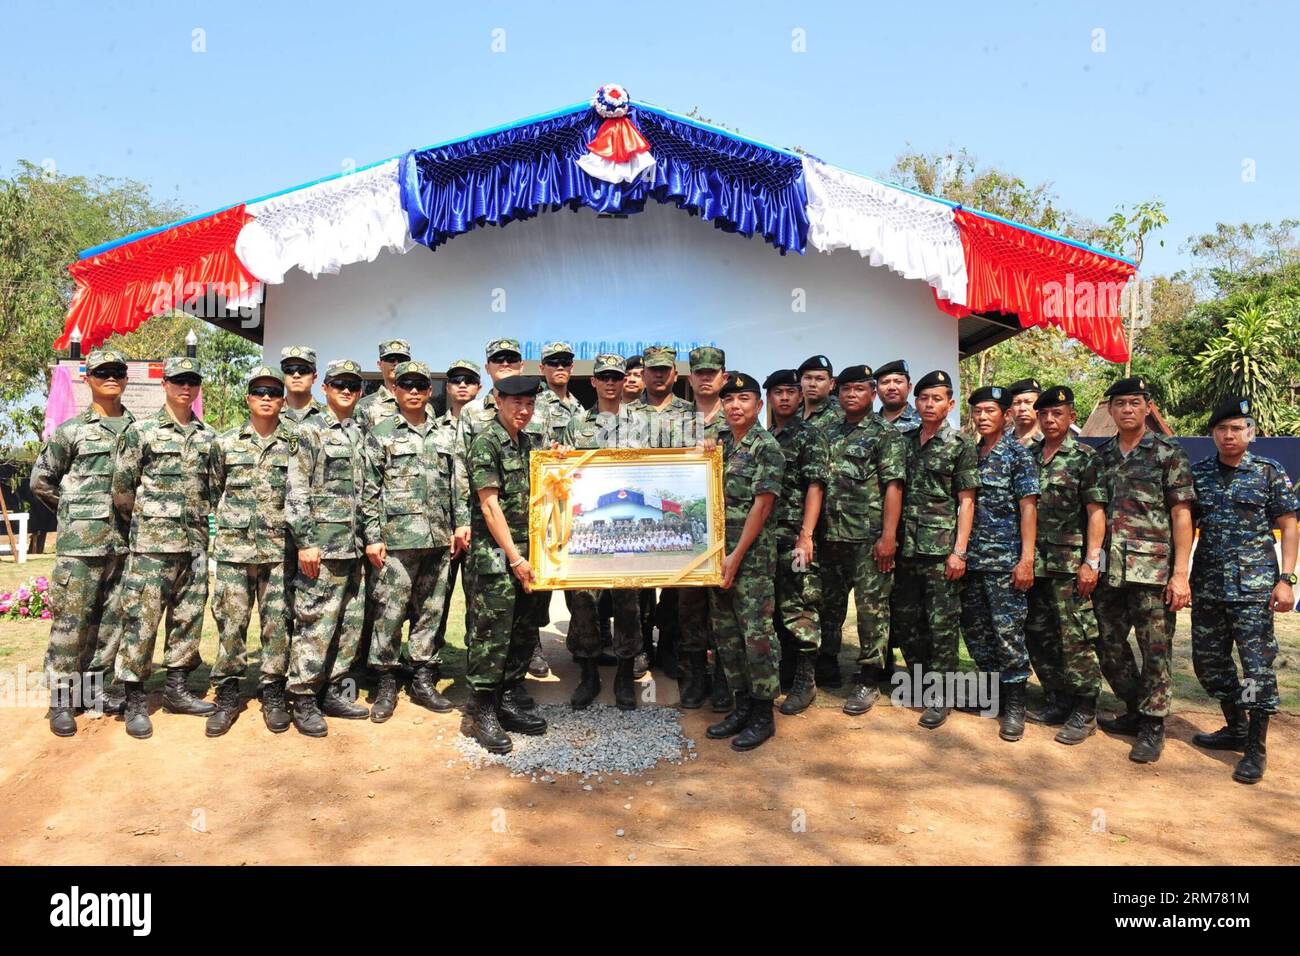 (140218) -- PITSANULOKE, Feb. 18, 2014 (Xinhua) -- Chinese and Thai soldiers pose for a group photo during the exercise Cobra Gold 2014 at a school in Pitsanuloke Province, Thailand, Feb. 18, 2014. China has sent troops to attend the multilateral military exercise Cobra Gold, led by the United States and Thailand, for the first time. The seventeen-strong Chinese squad will take part in operations at the command and coordination center, engineering assistance, medical aid as well as discussions and exchanges of military medical sciences, according to officers with the foreign affairs office of Stock Photo